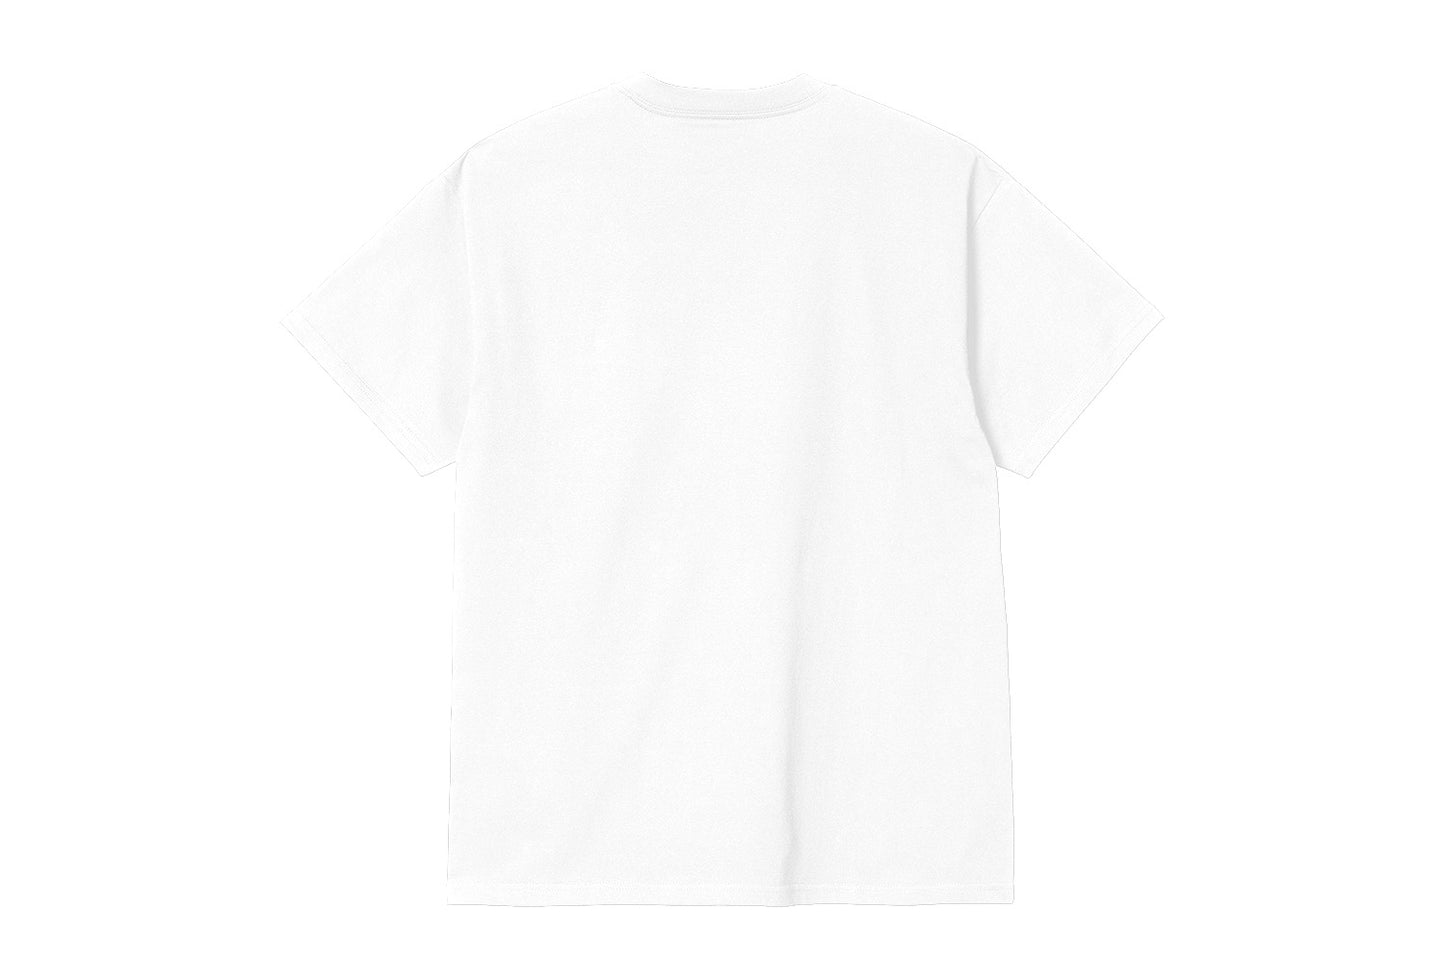 S/S Archive Girl T-Shirt